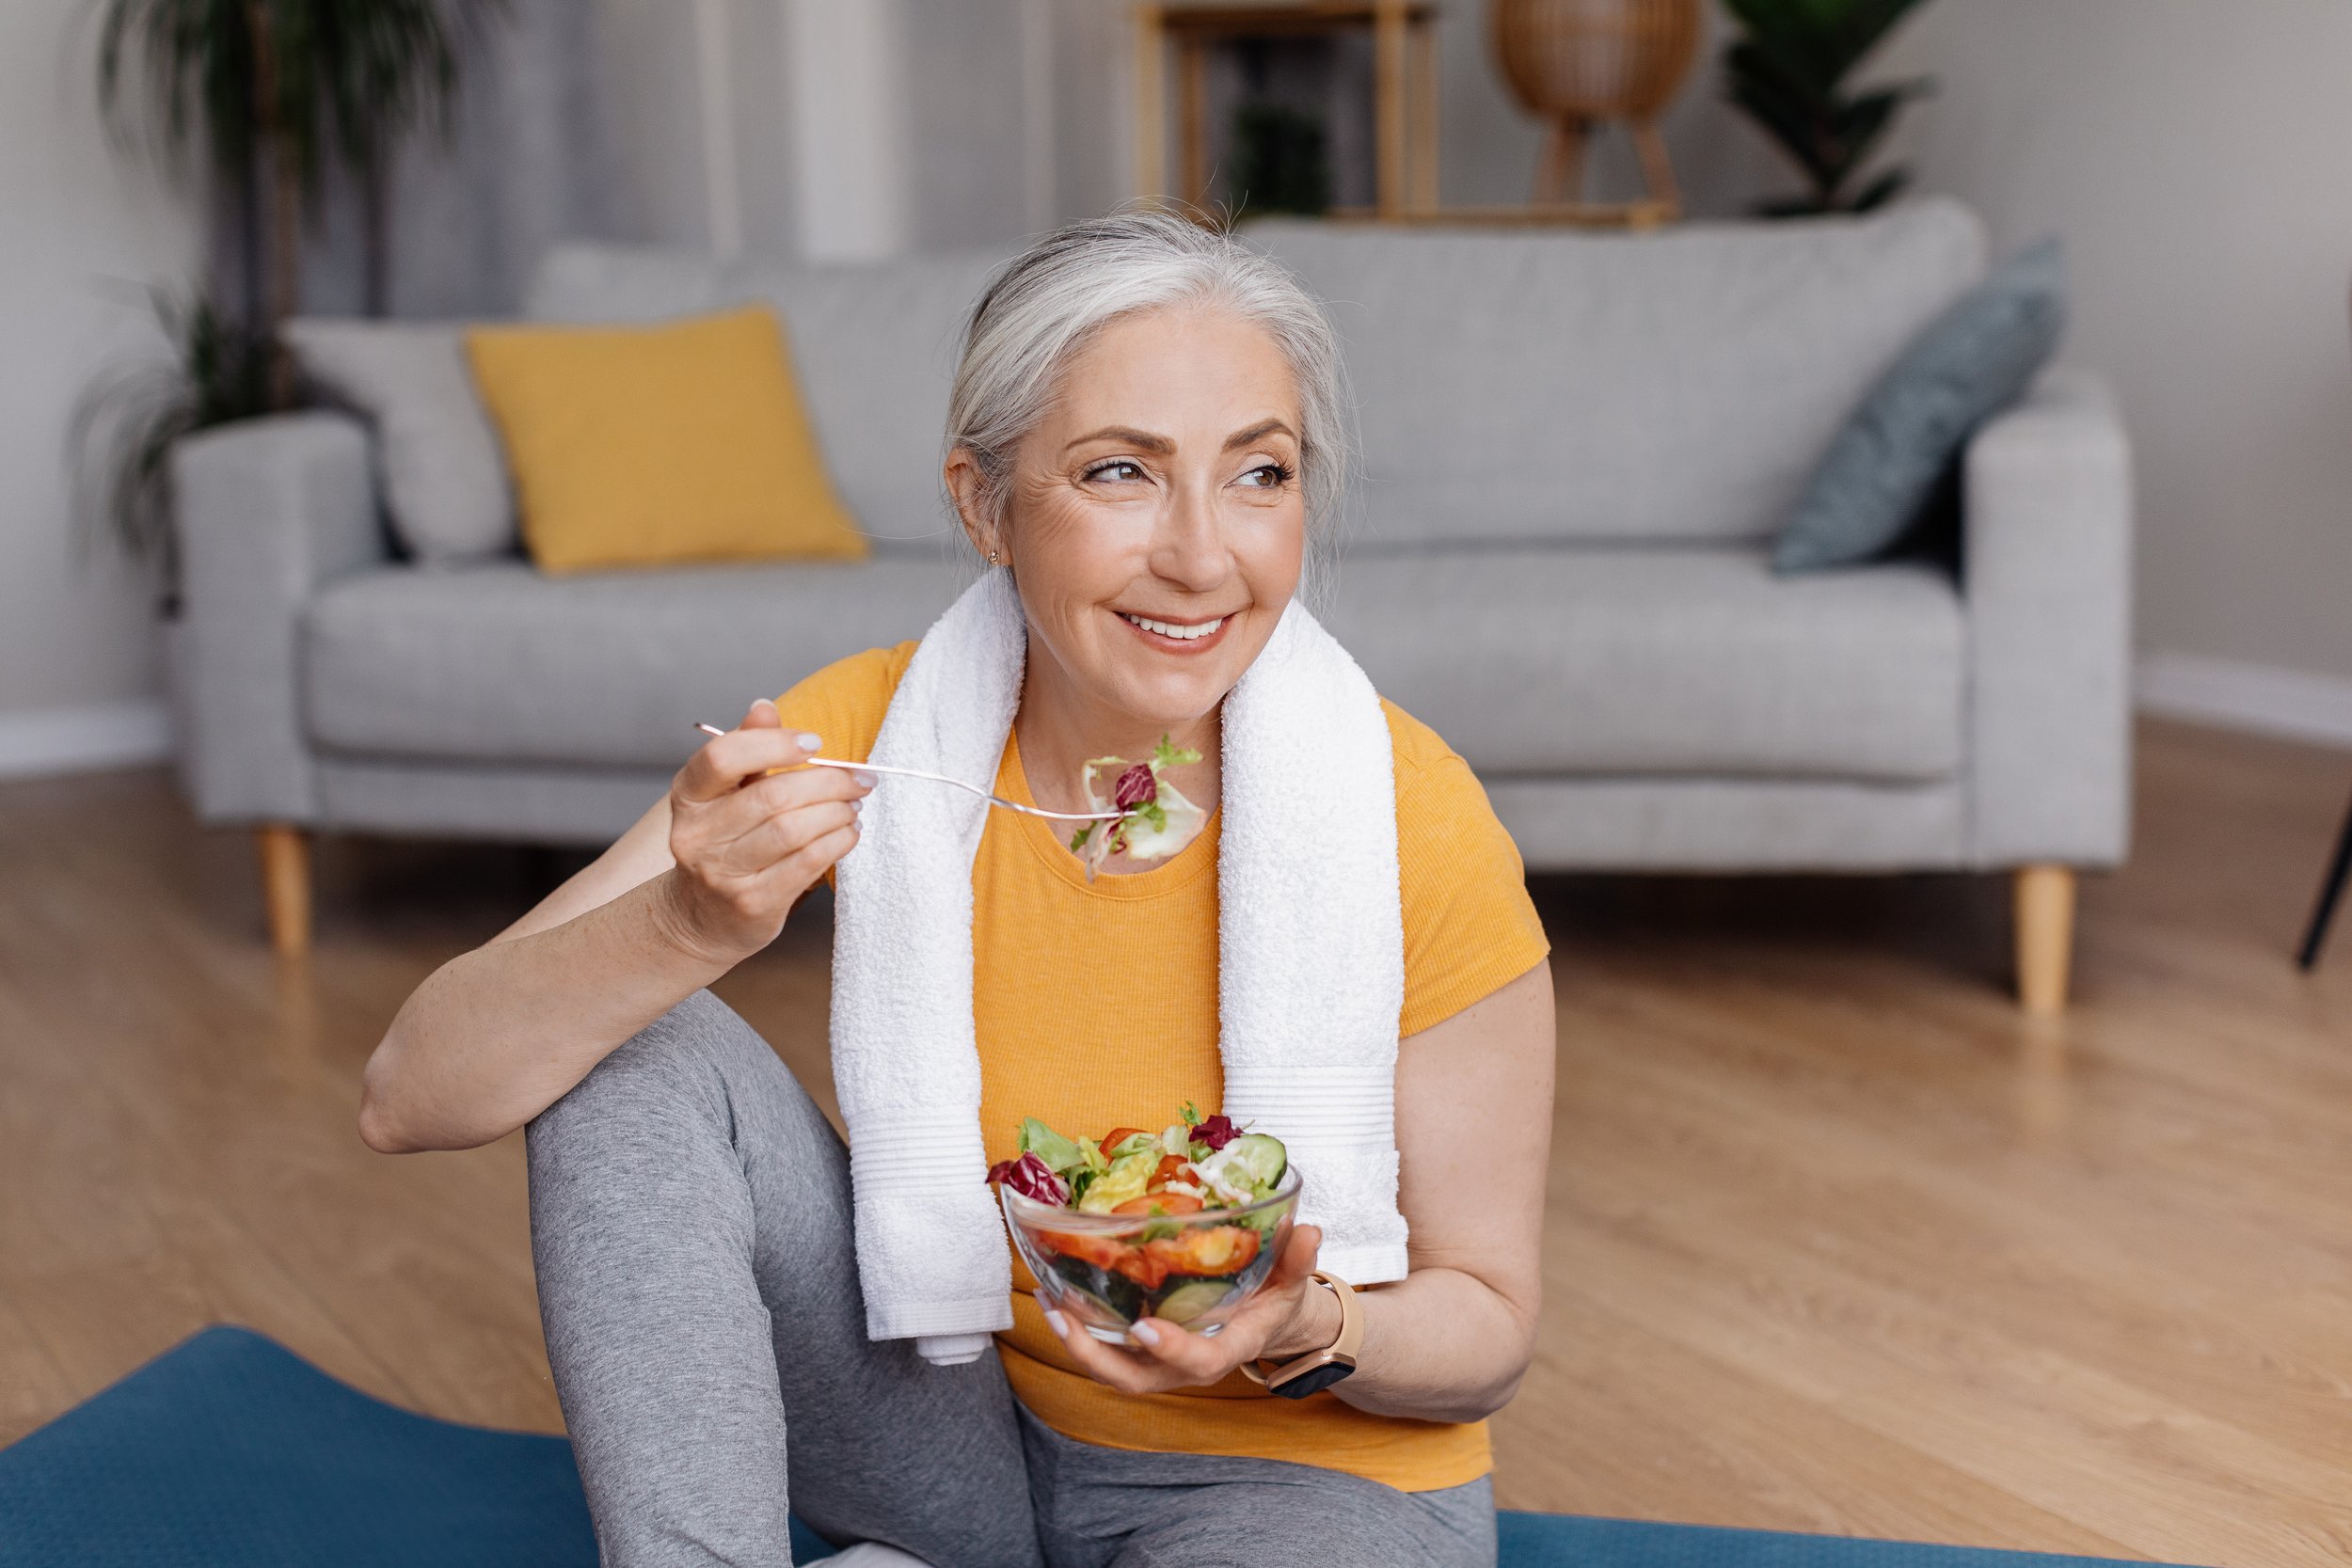 woman after working out eating healthy salad